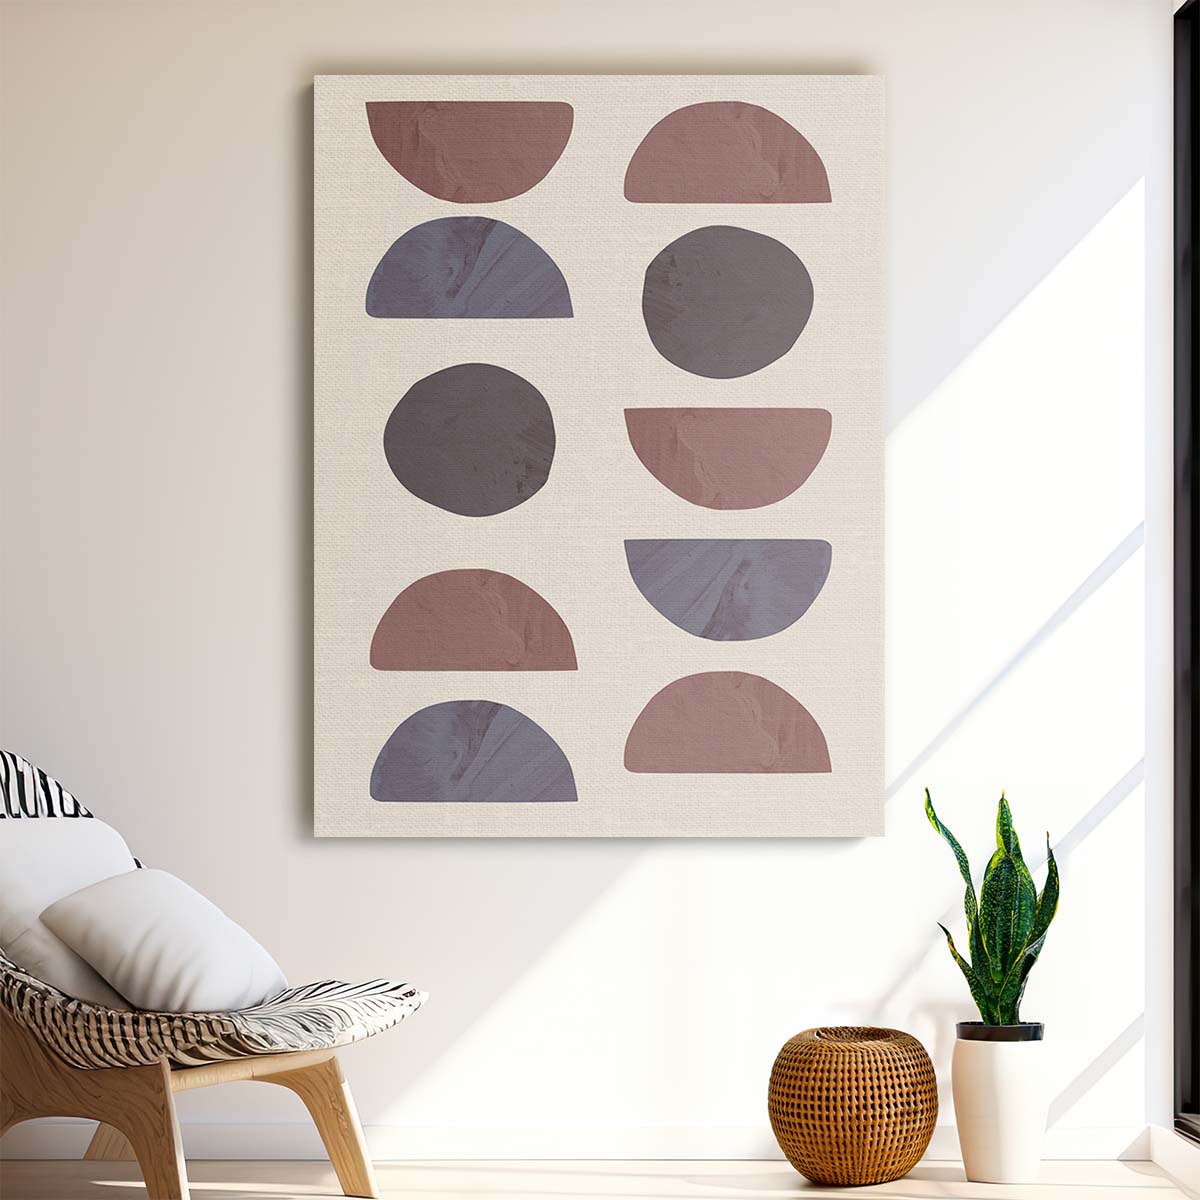 Geometric Abstract Beige Illustration - Graphic Shapes Collage Wall Art by Luxuriance Designs, made in USA